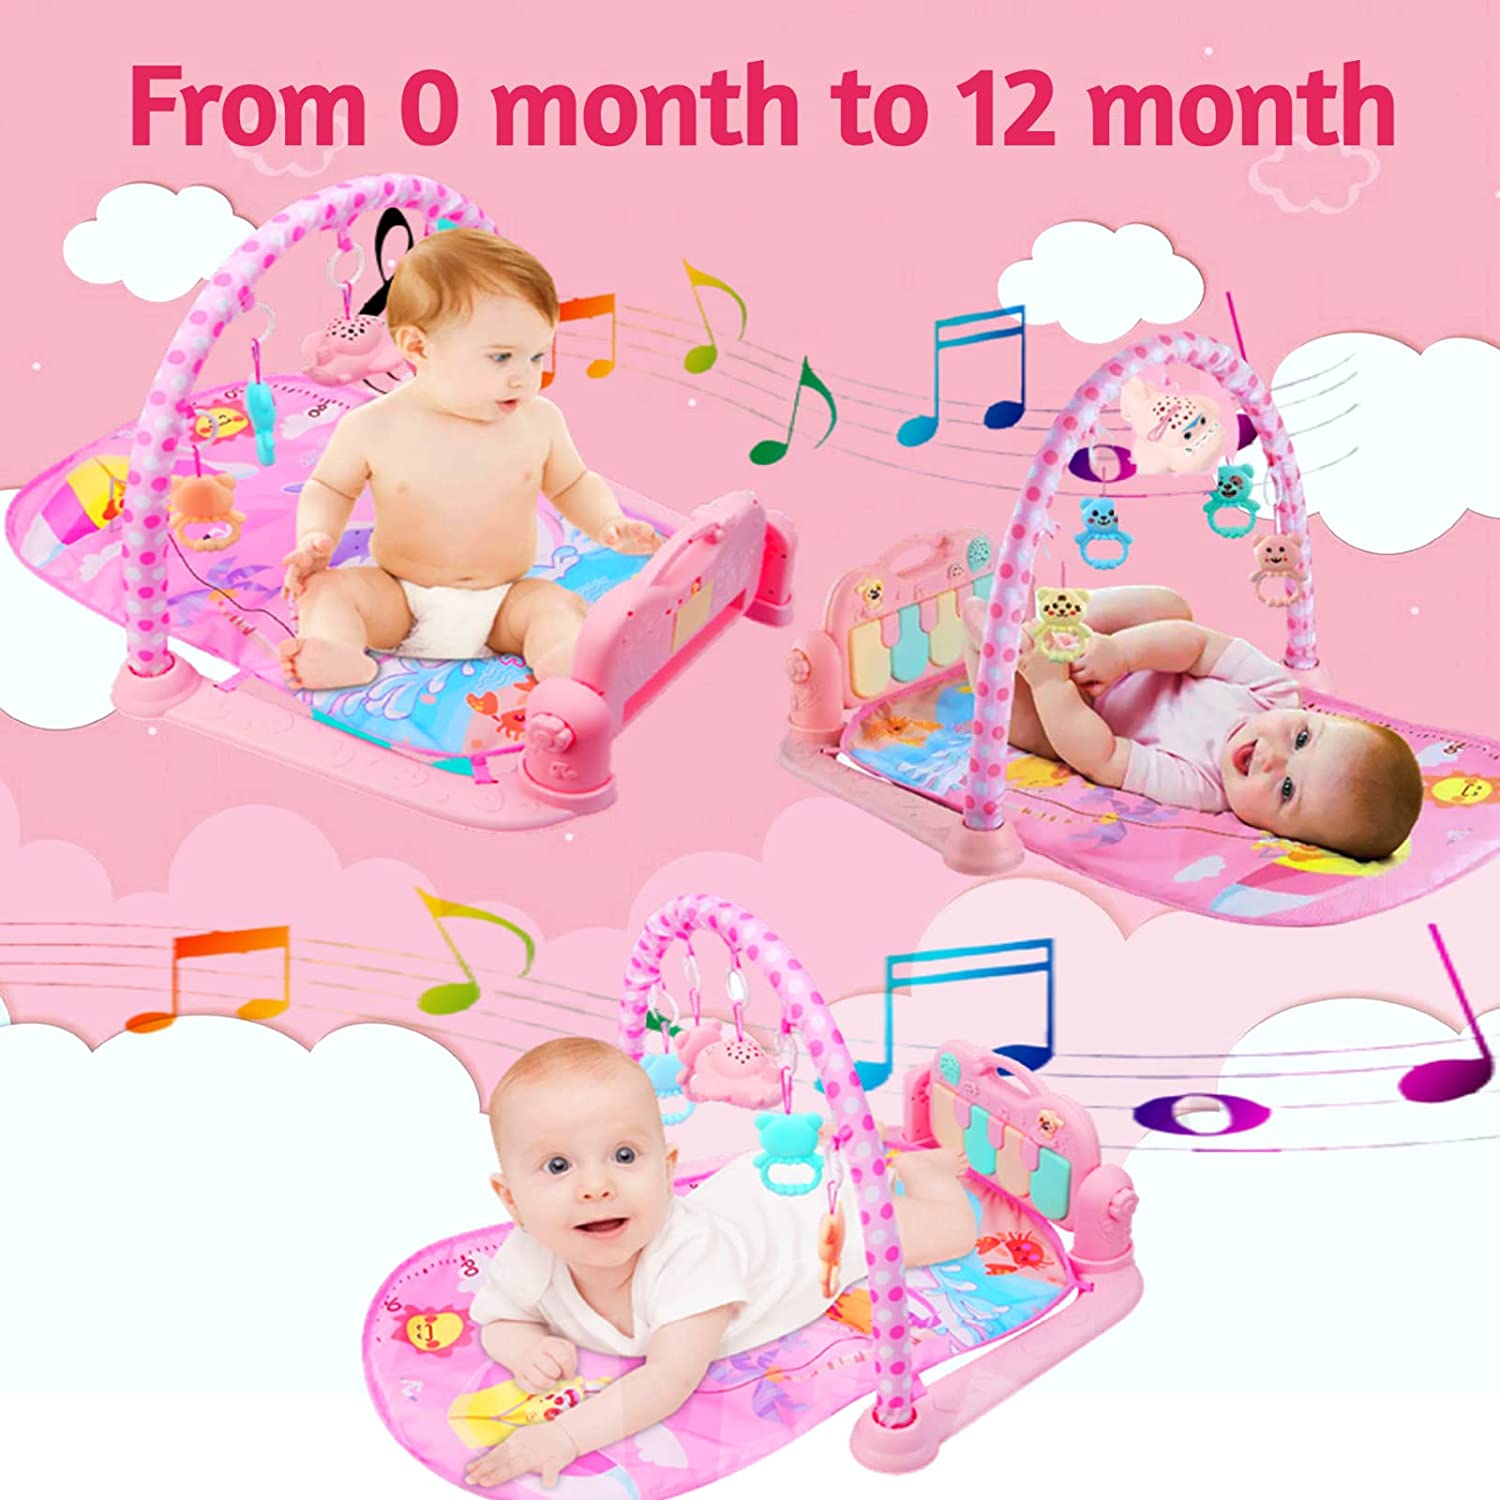 Metreno Baby Play mat Gym with Toys Hanging Play mat for Babies Musical Keyboard Mat Piano Baby Gym Mat and Fitness Rack Crawling Mat for 0-18 Months Baby Play mats